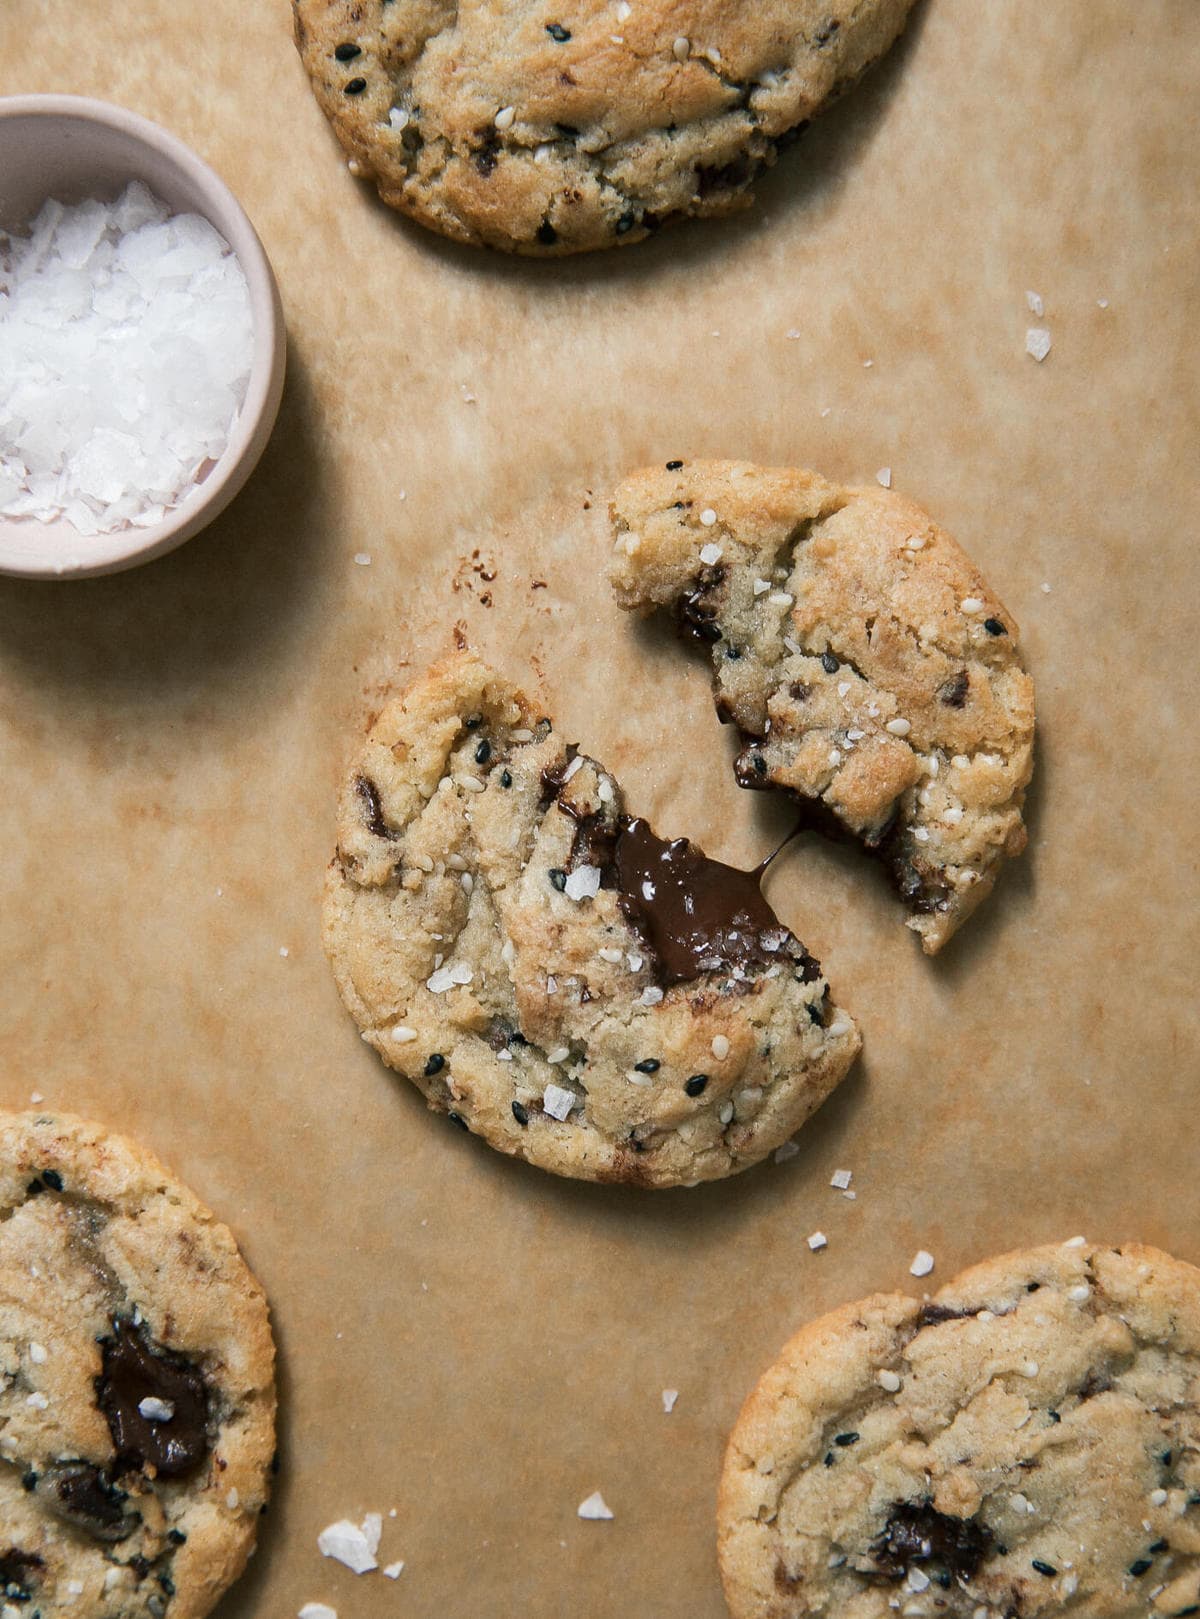 15 Christmas Cookie Recipes